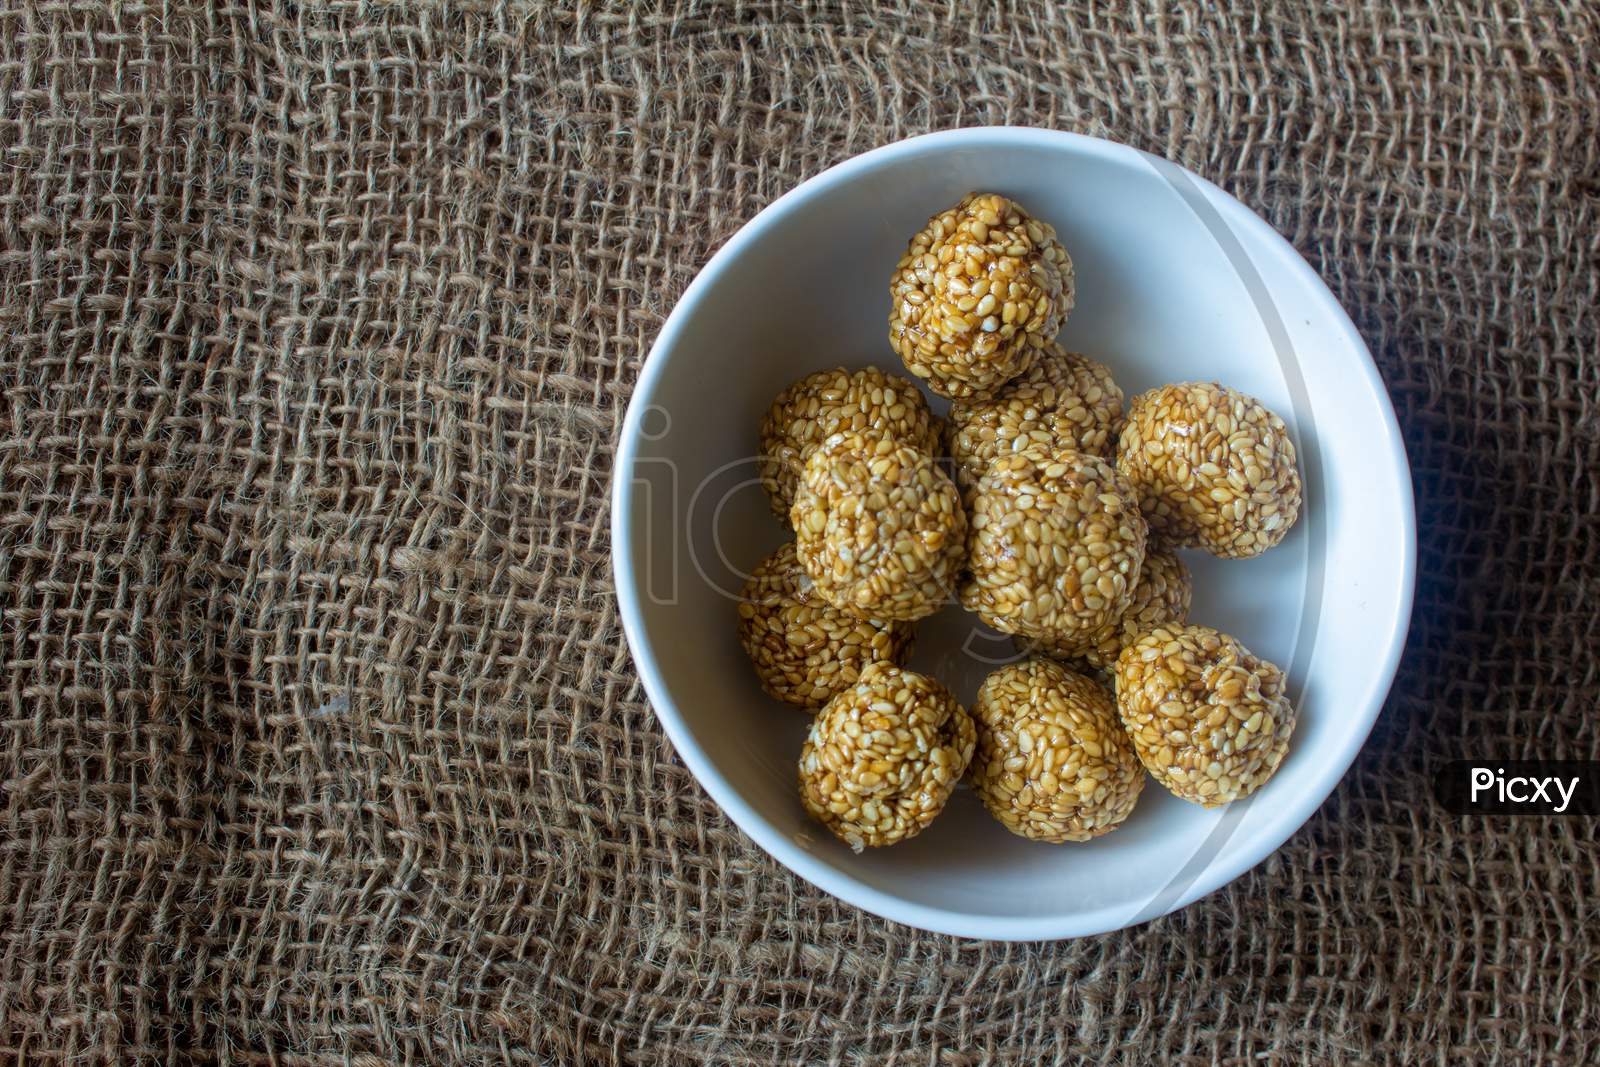 Sesame Laddu (Also Known As Ellu Urundai In Tamil Language) Is Made Of Sesame Seeds And Jaggery